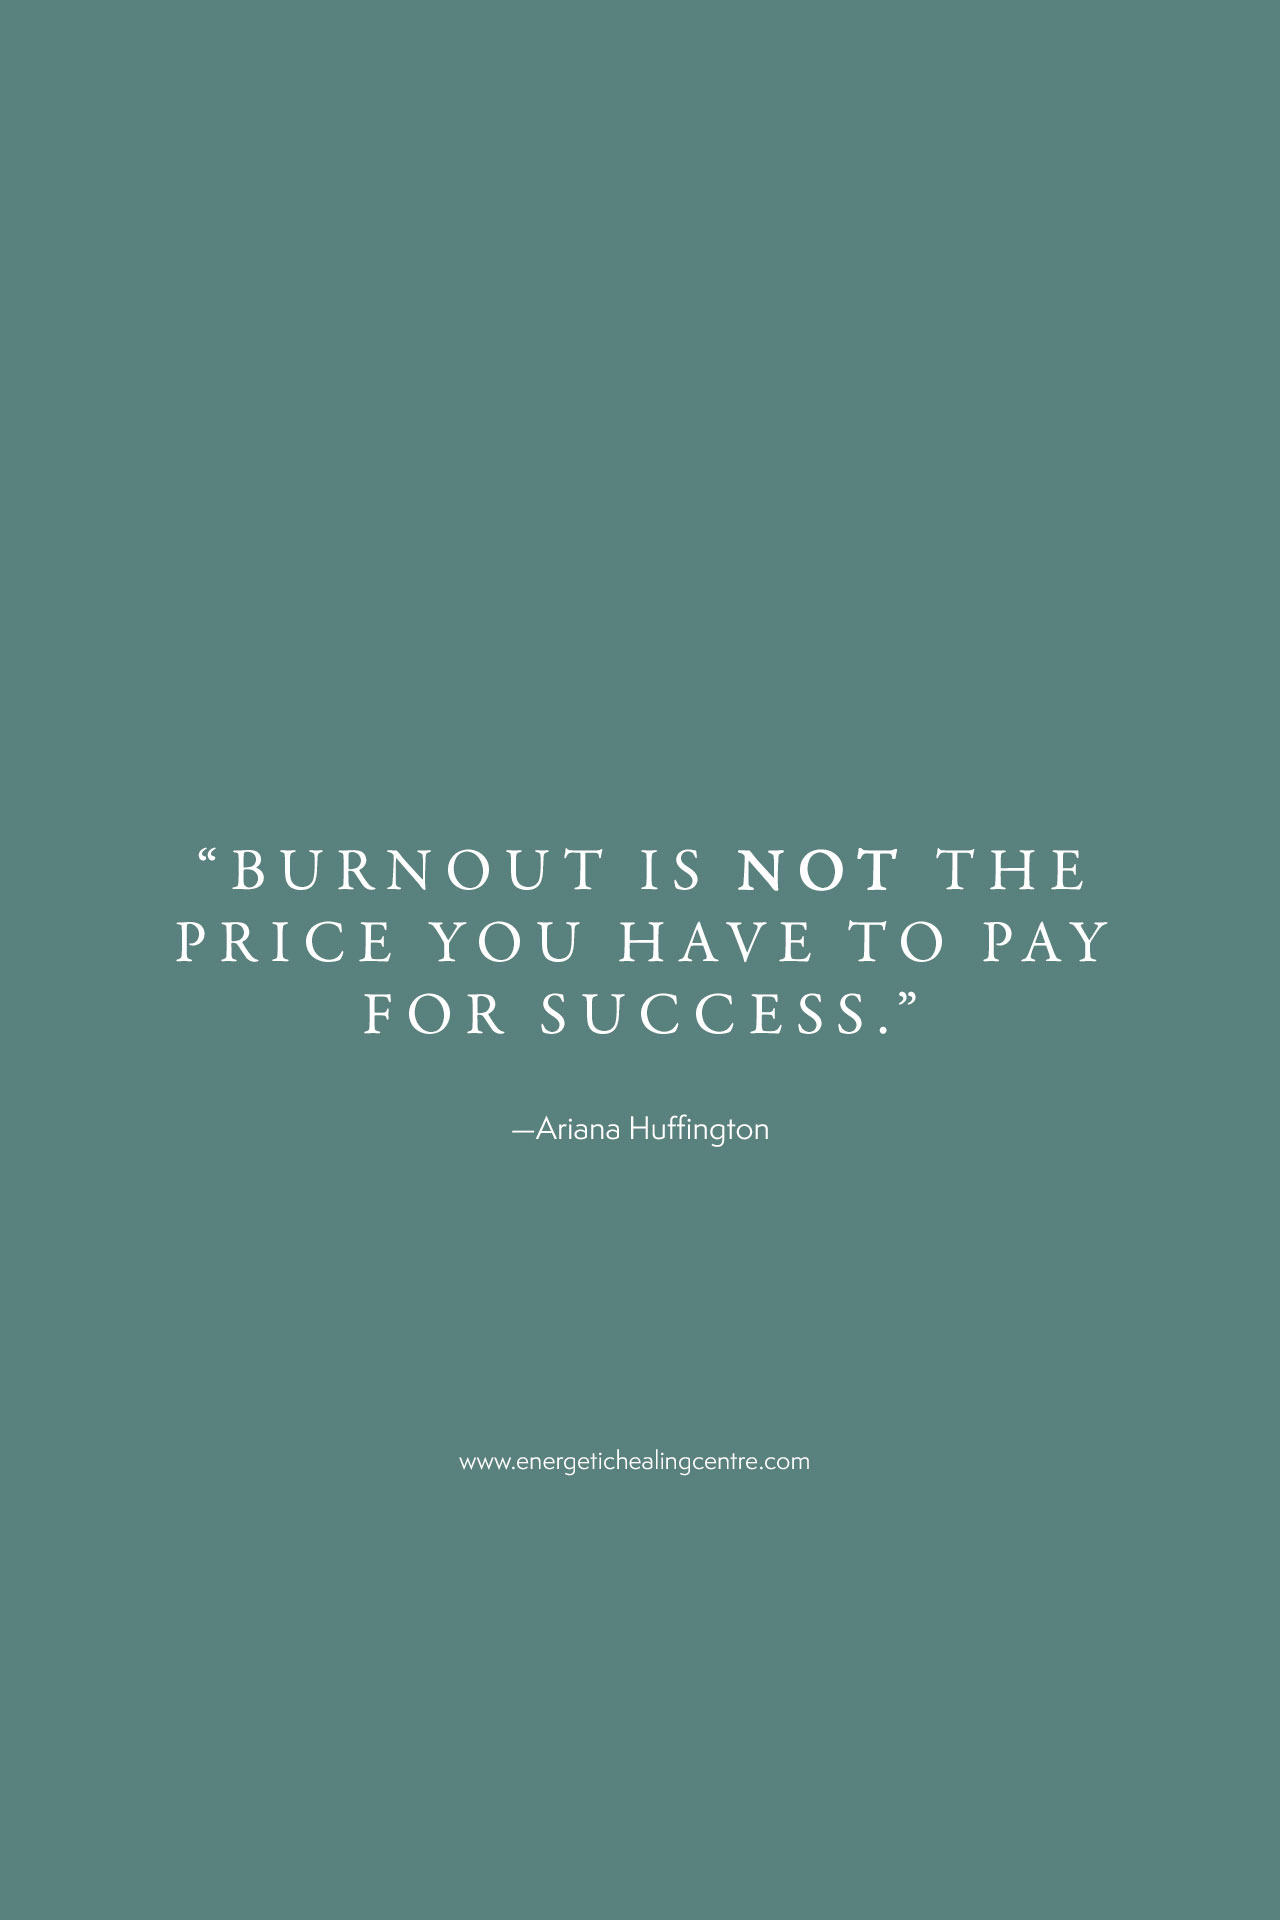 Burnout is not the price you have to pay for success